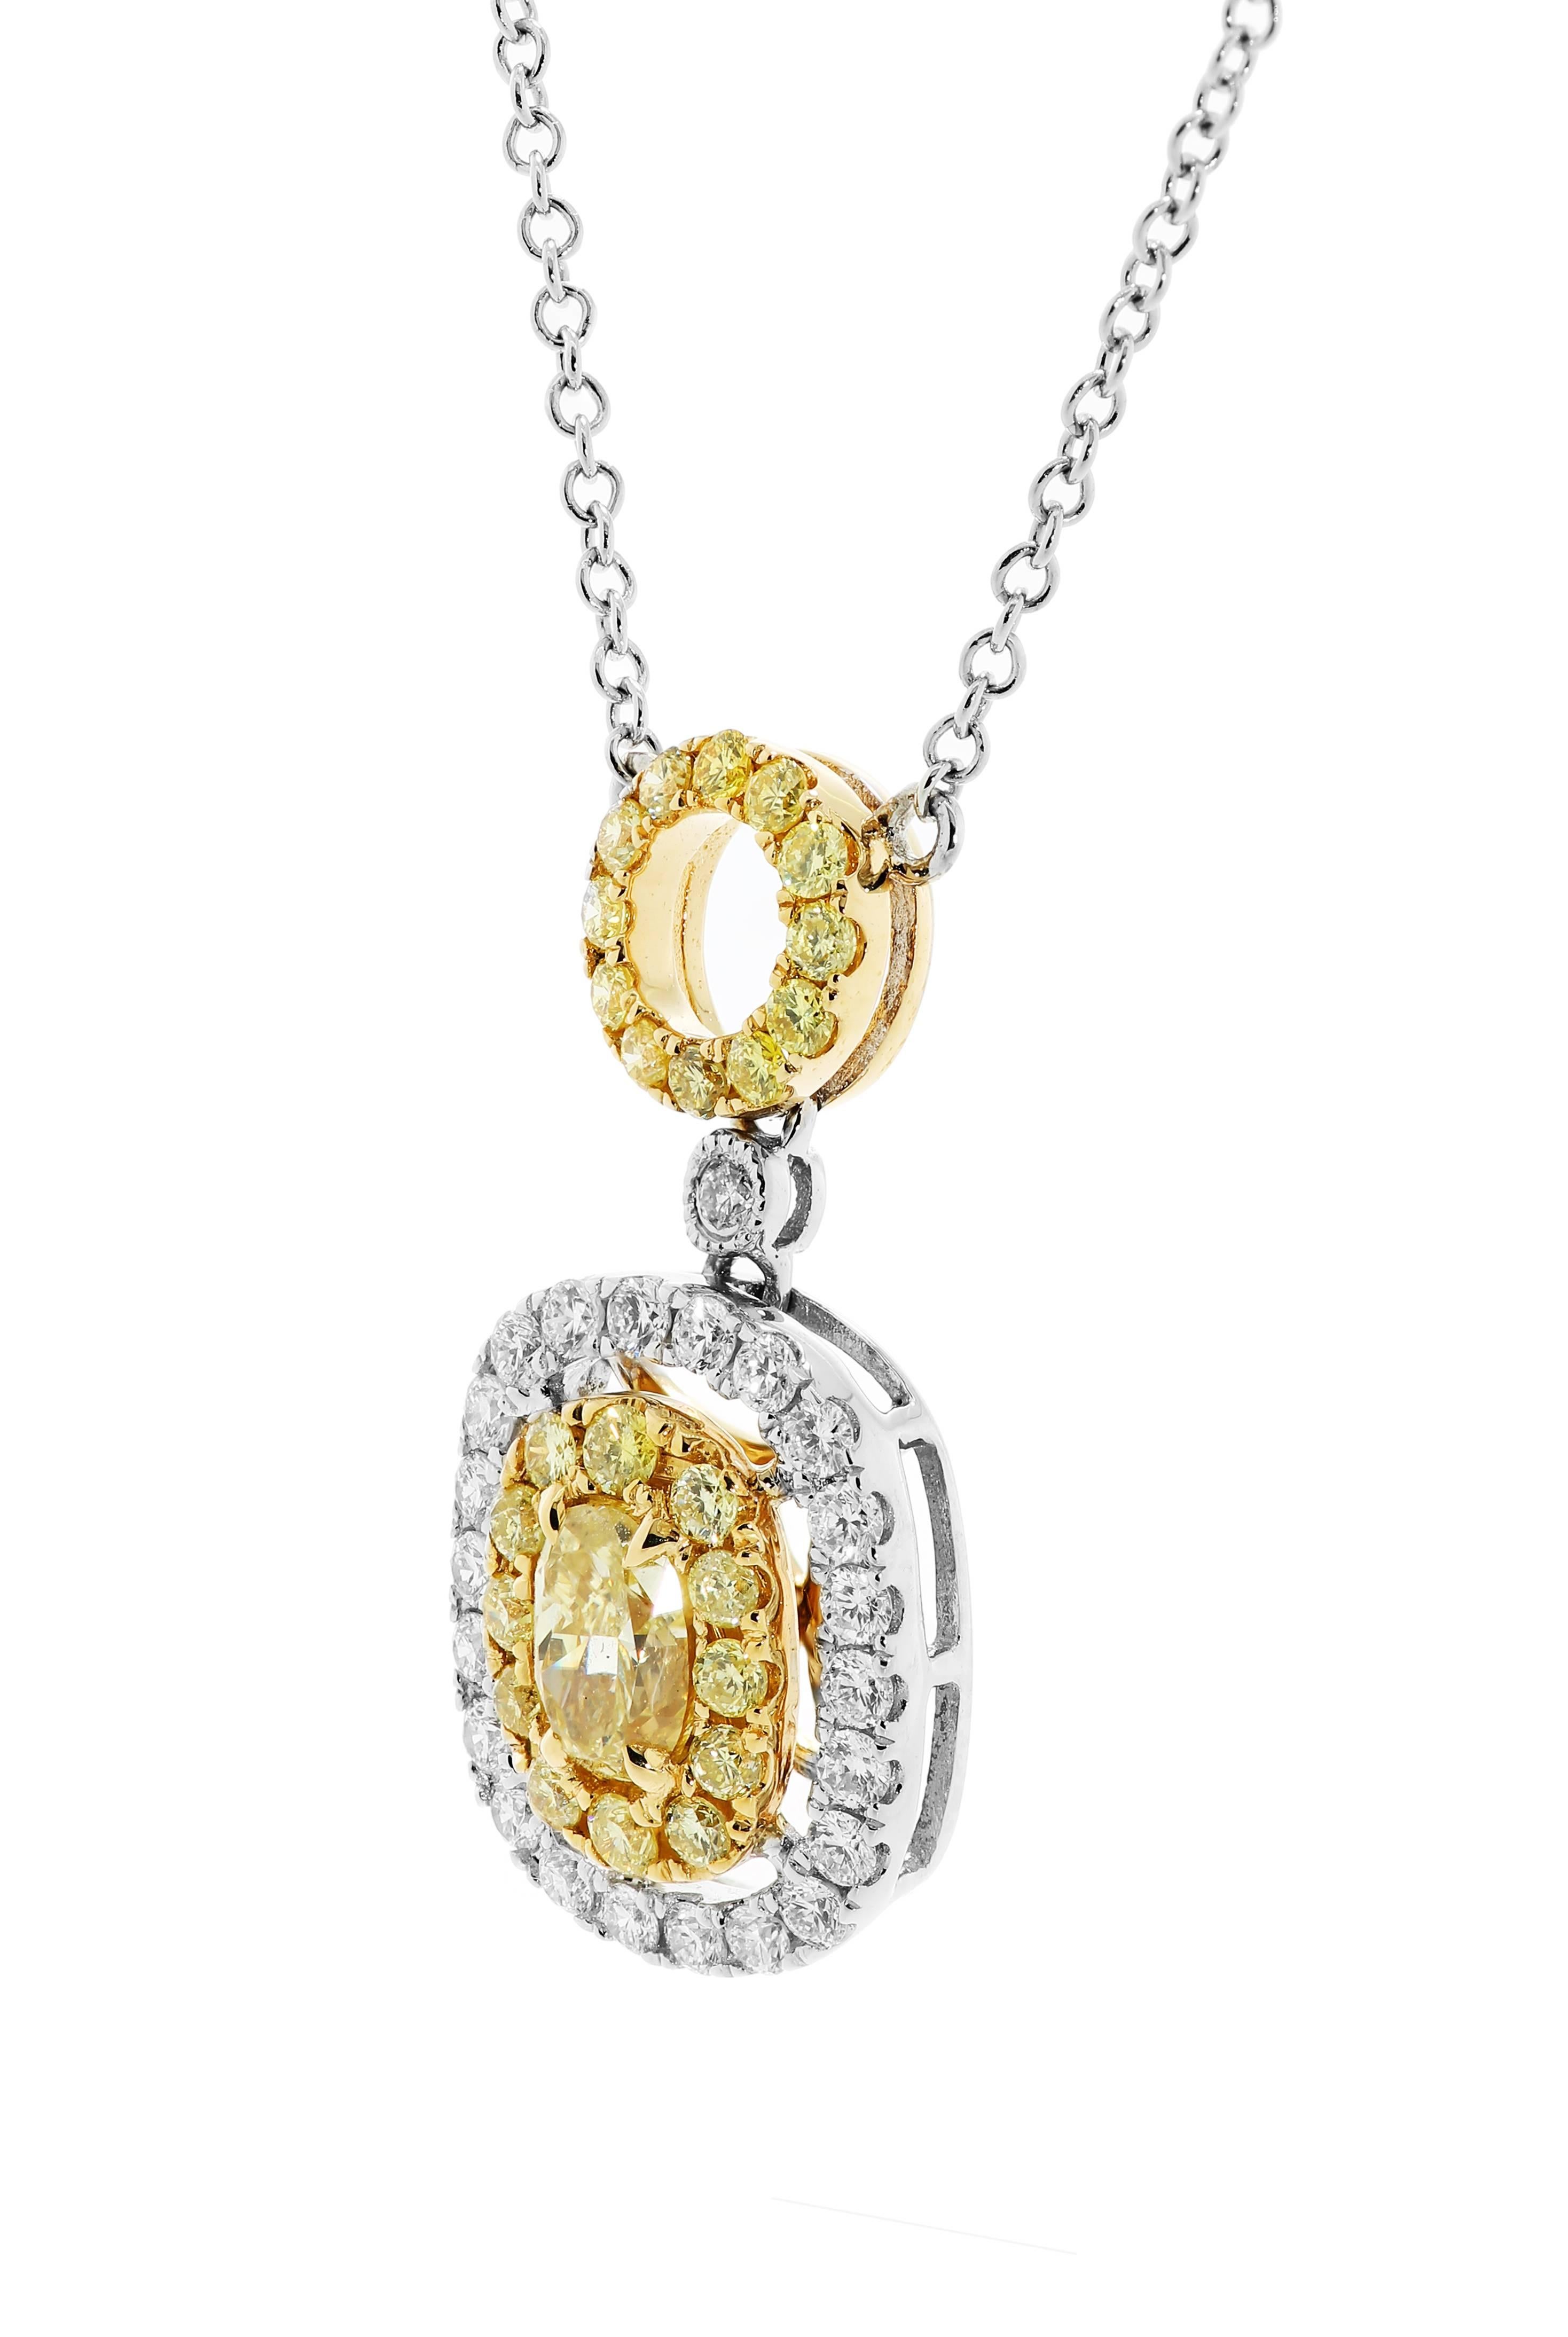 Natural Fancy yellow Diamond Oval 0.46 Carat encircled in a double Halo of Natural fancy yellow diamond rounds 0.45 Carat and white diamond round 0.27 Carat in 18K White and Yellow Gold Necklace with Diamond By Yard Chain.

Style available in